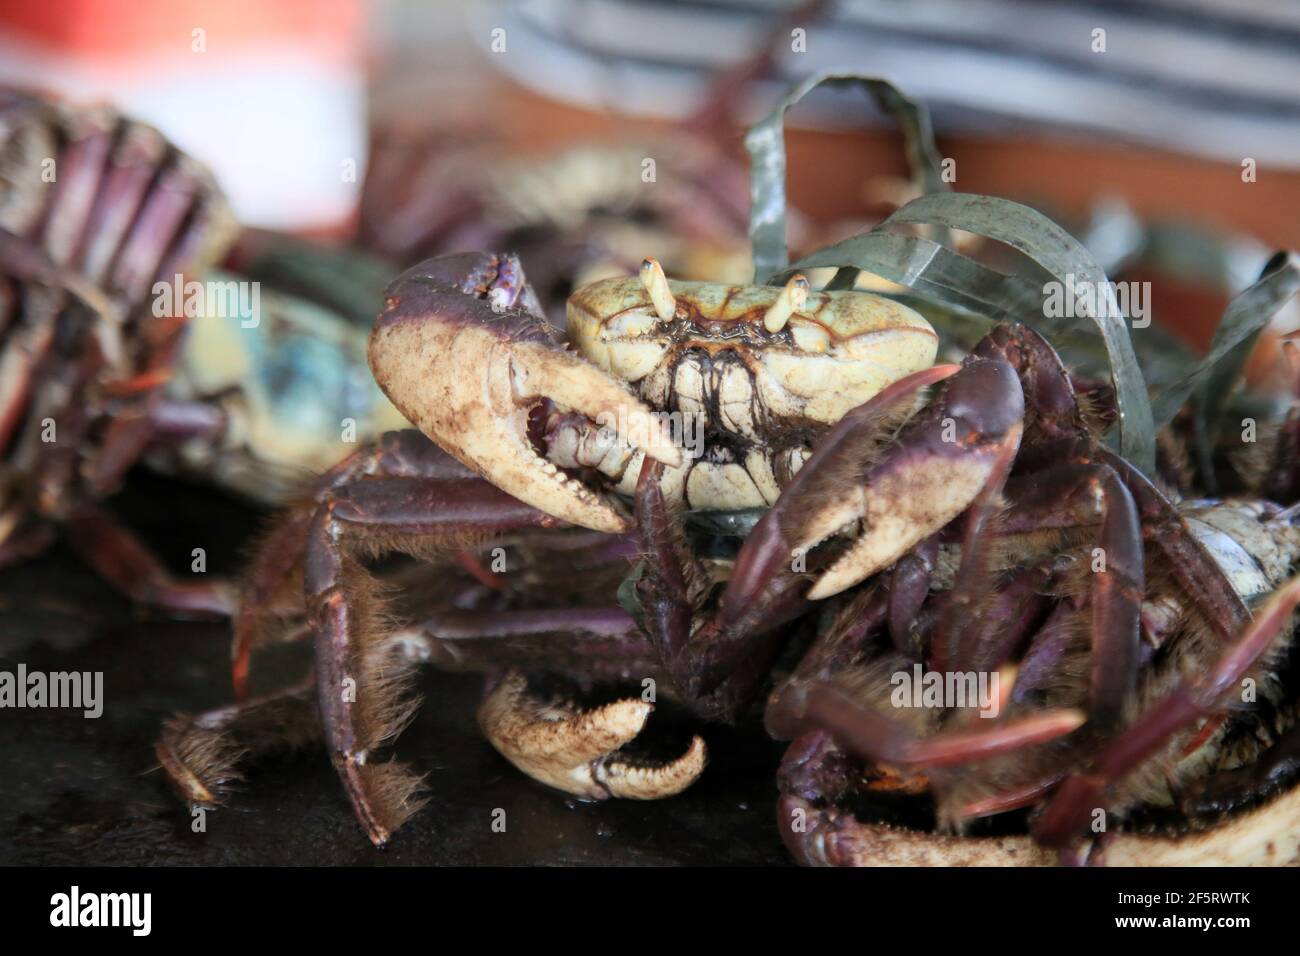 salvador, bahia, brazil - february 4, 2021: uca crab - Ucides cordatus - is seen for sale at the Itapua Municipal market in the city. *** Local Captio Stock Photo